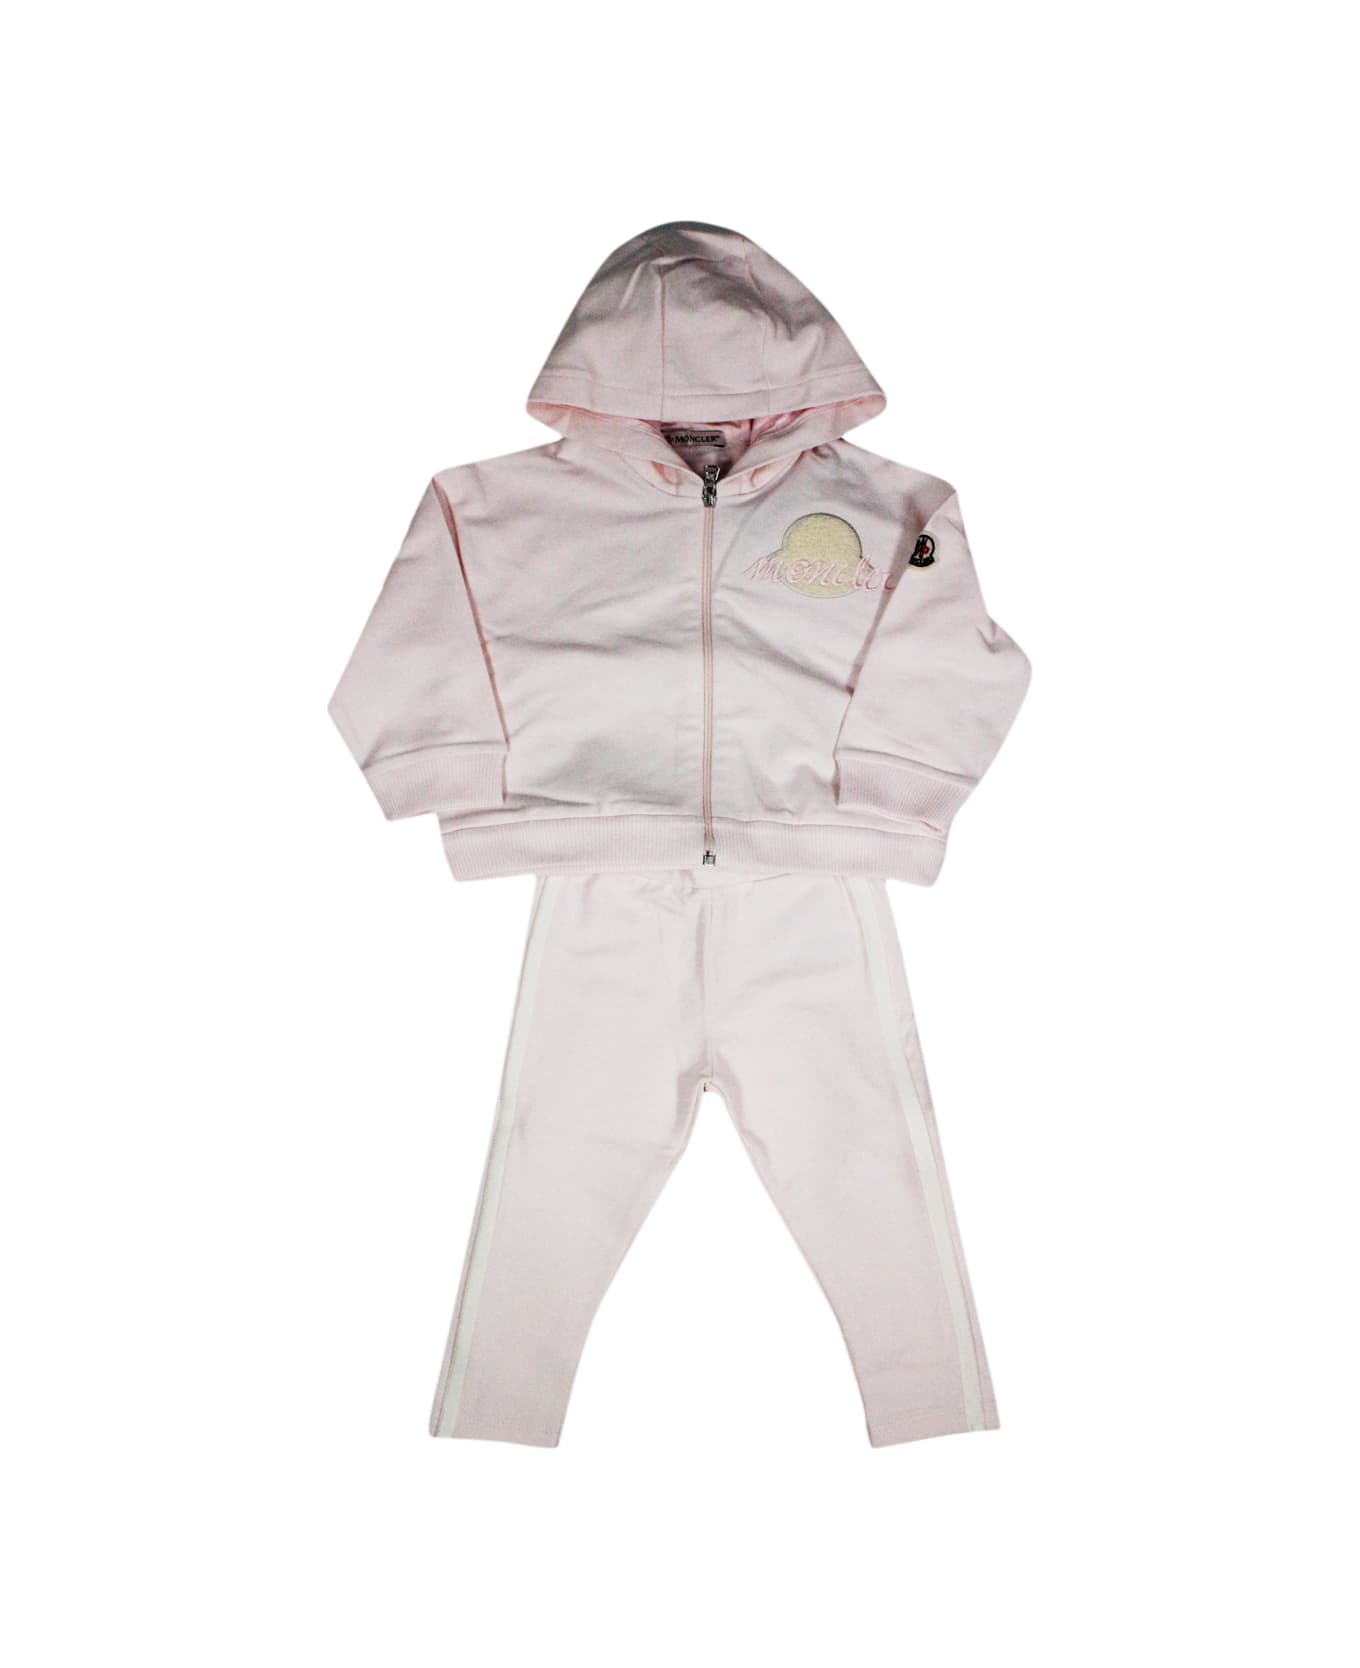 Moncler Complete With Zip-up Sweatshirt With Long-sleeved Hood In Fine Cotton And Trousers With Elastic Waist. Logo On The Chest - Pink ボディスーツ＆セットアップ